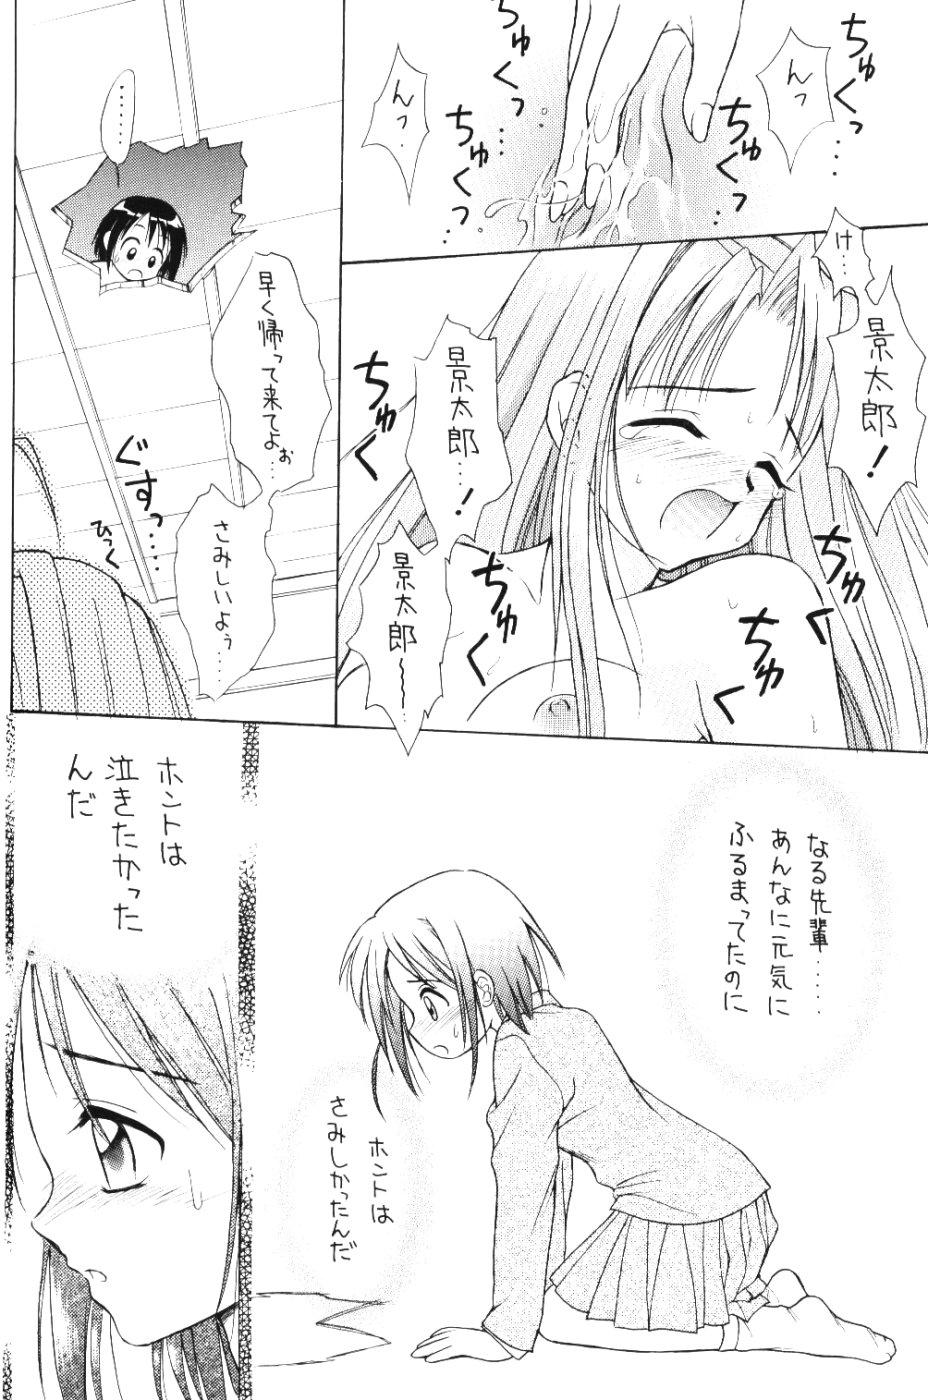 Stunning Lovely 4 - Love hina Babes - Page 11